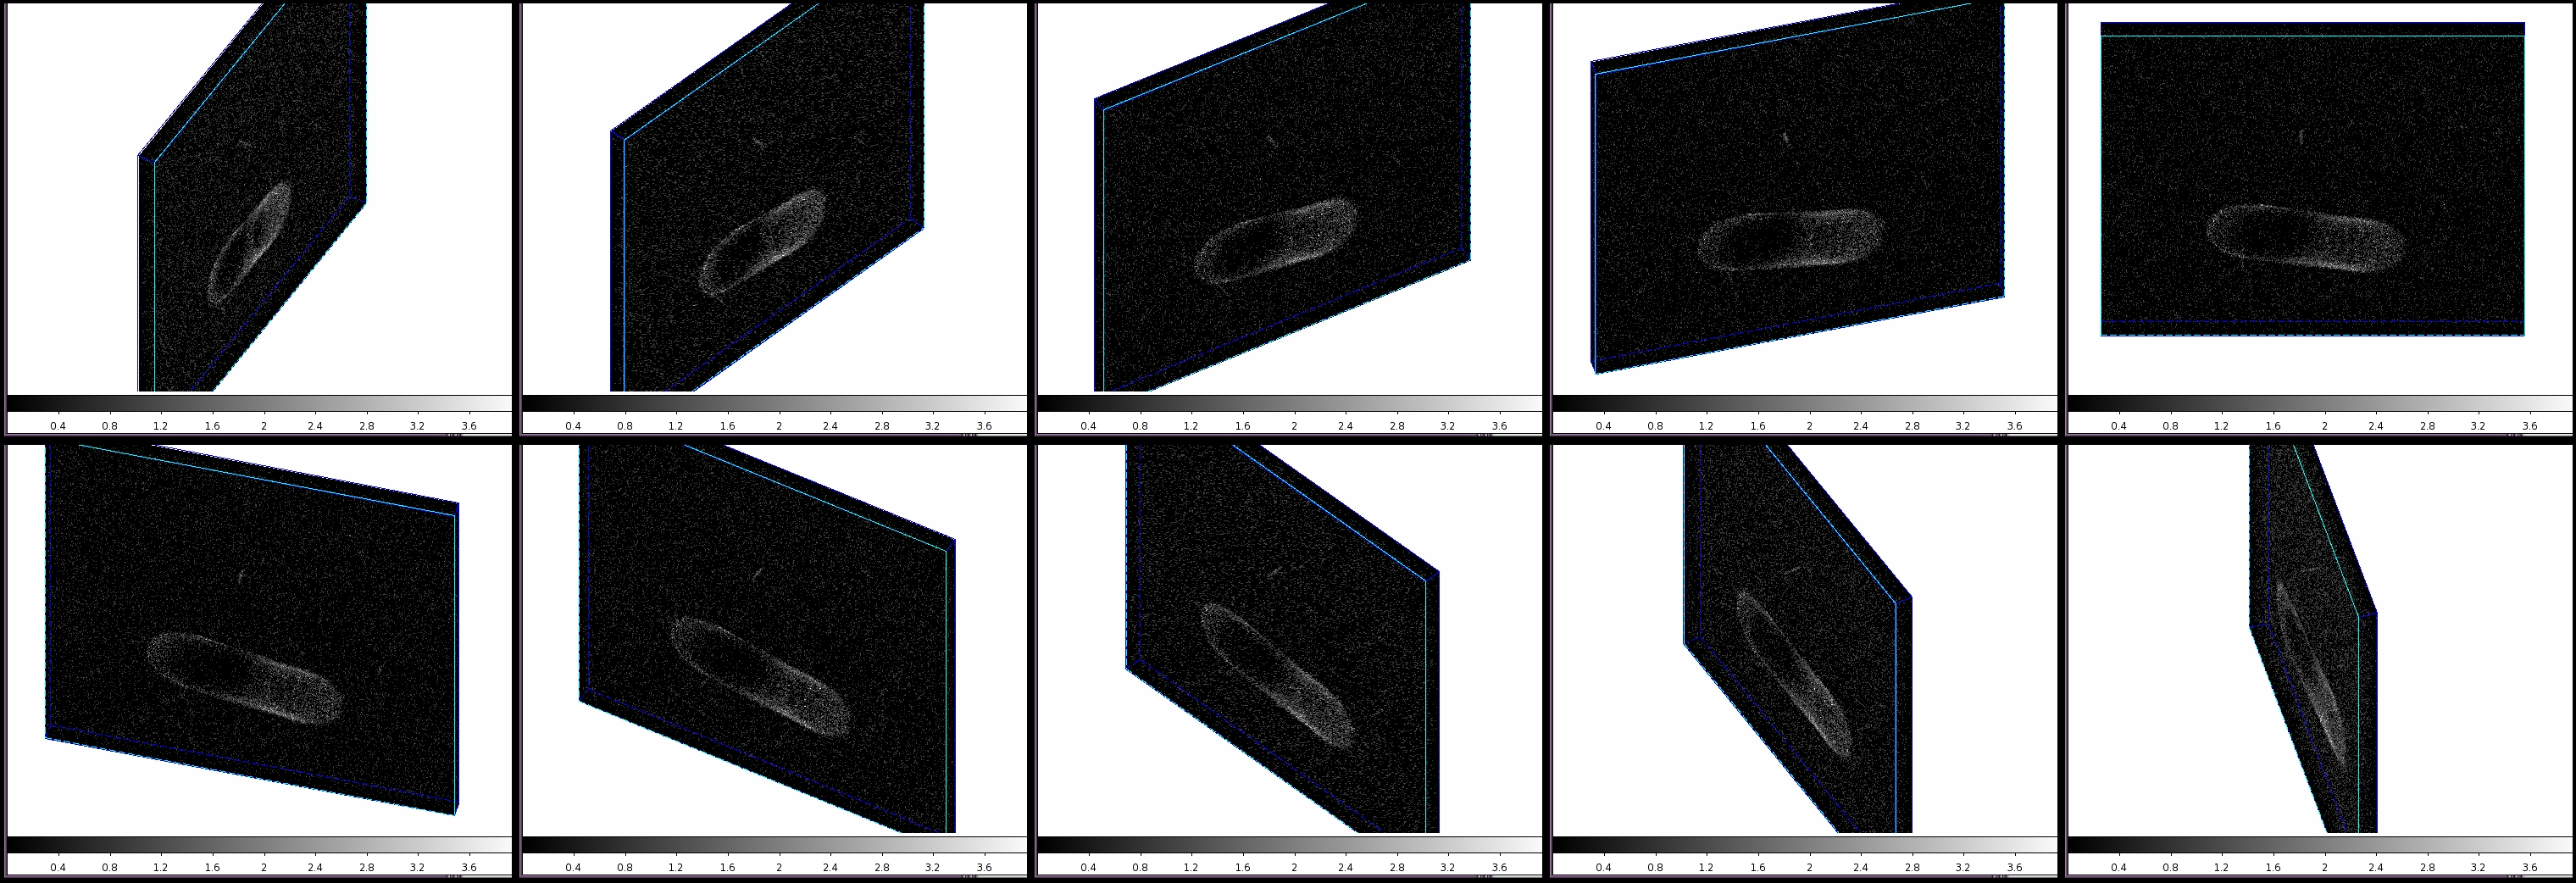 [Print media version: ds9 now supports real-time 3D rendering of data cubes. In this sequence of screen shots, the image has been rotated from -60 to +75 degrees.]